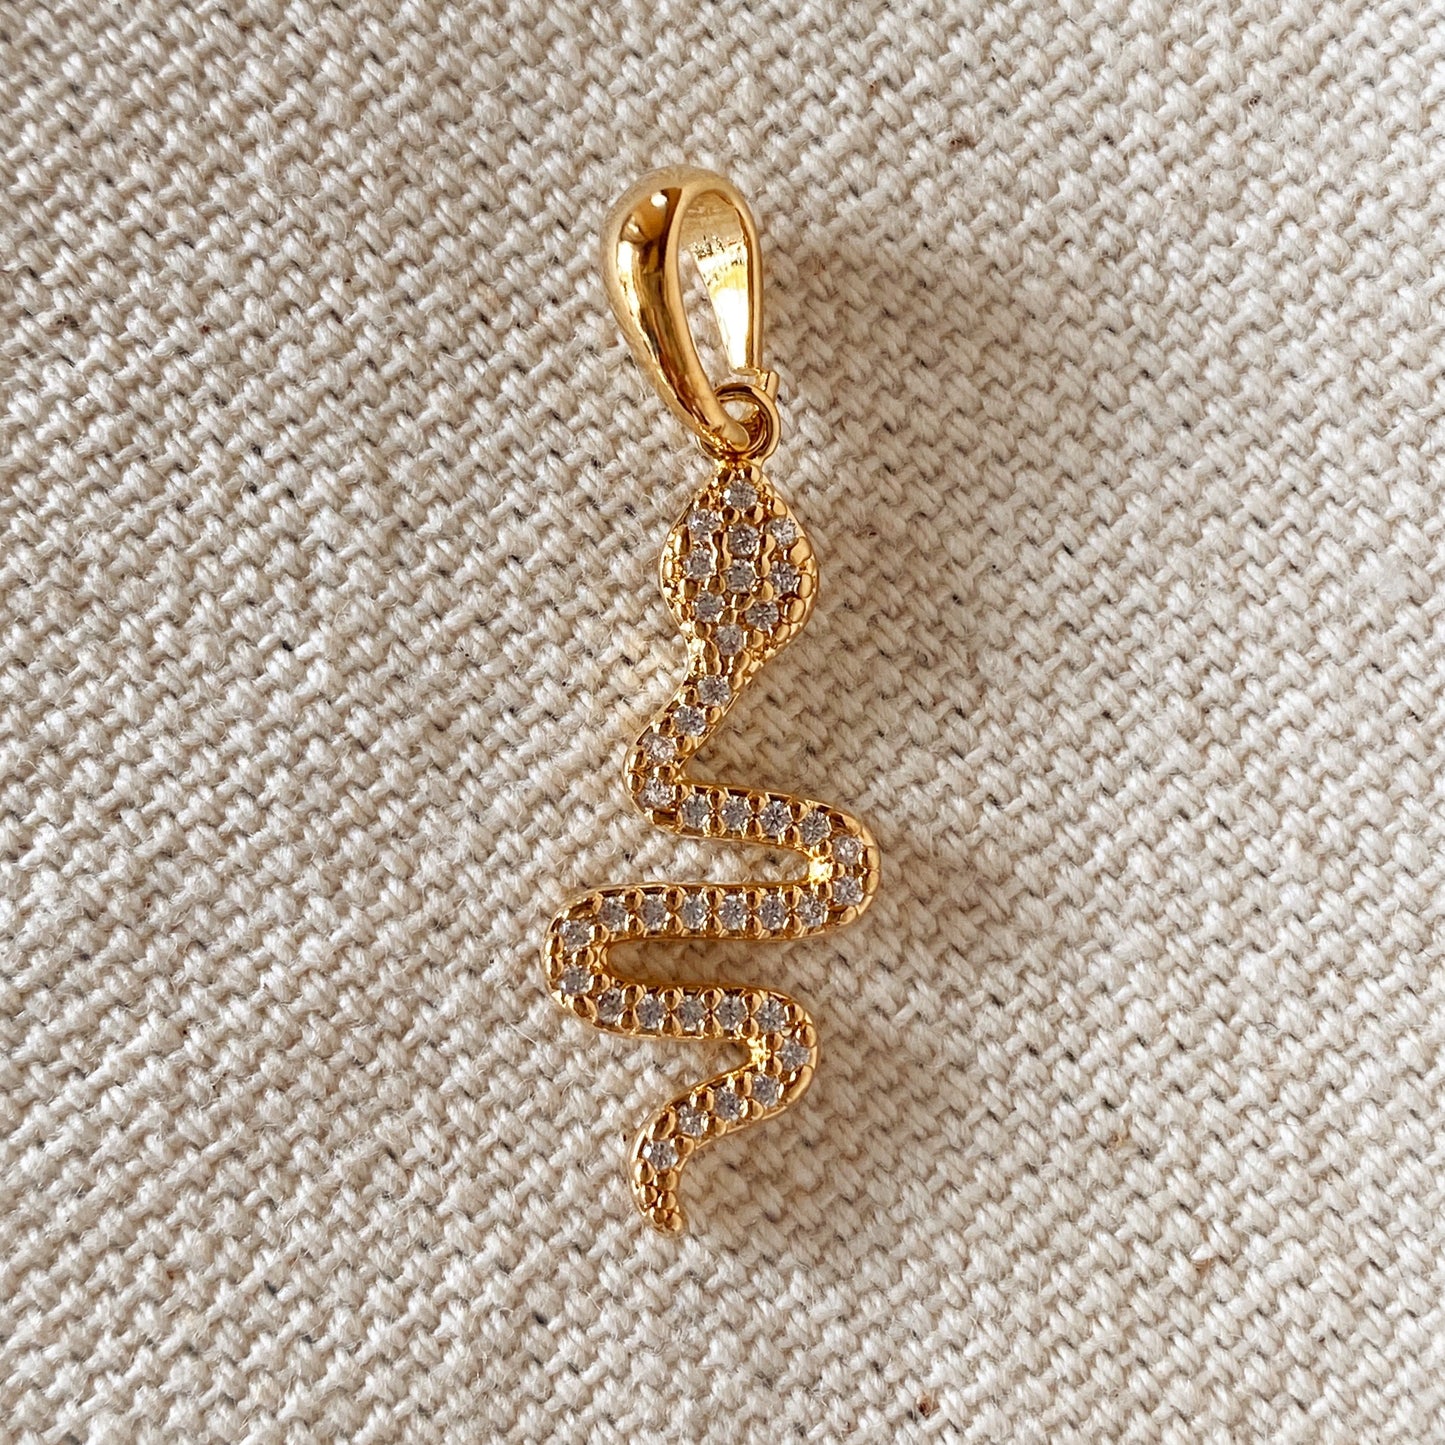 GoldFi 18k Gold Filled Serpent Pendant With Micro Pave Cubic Zirconia Accents